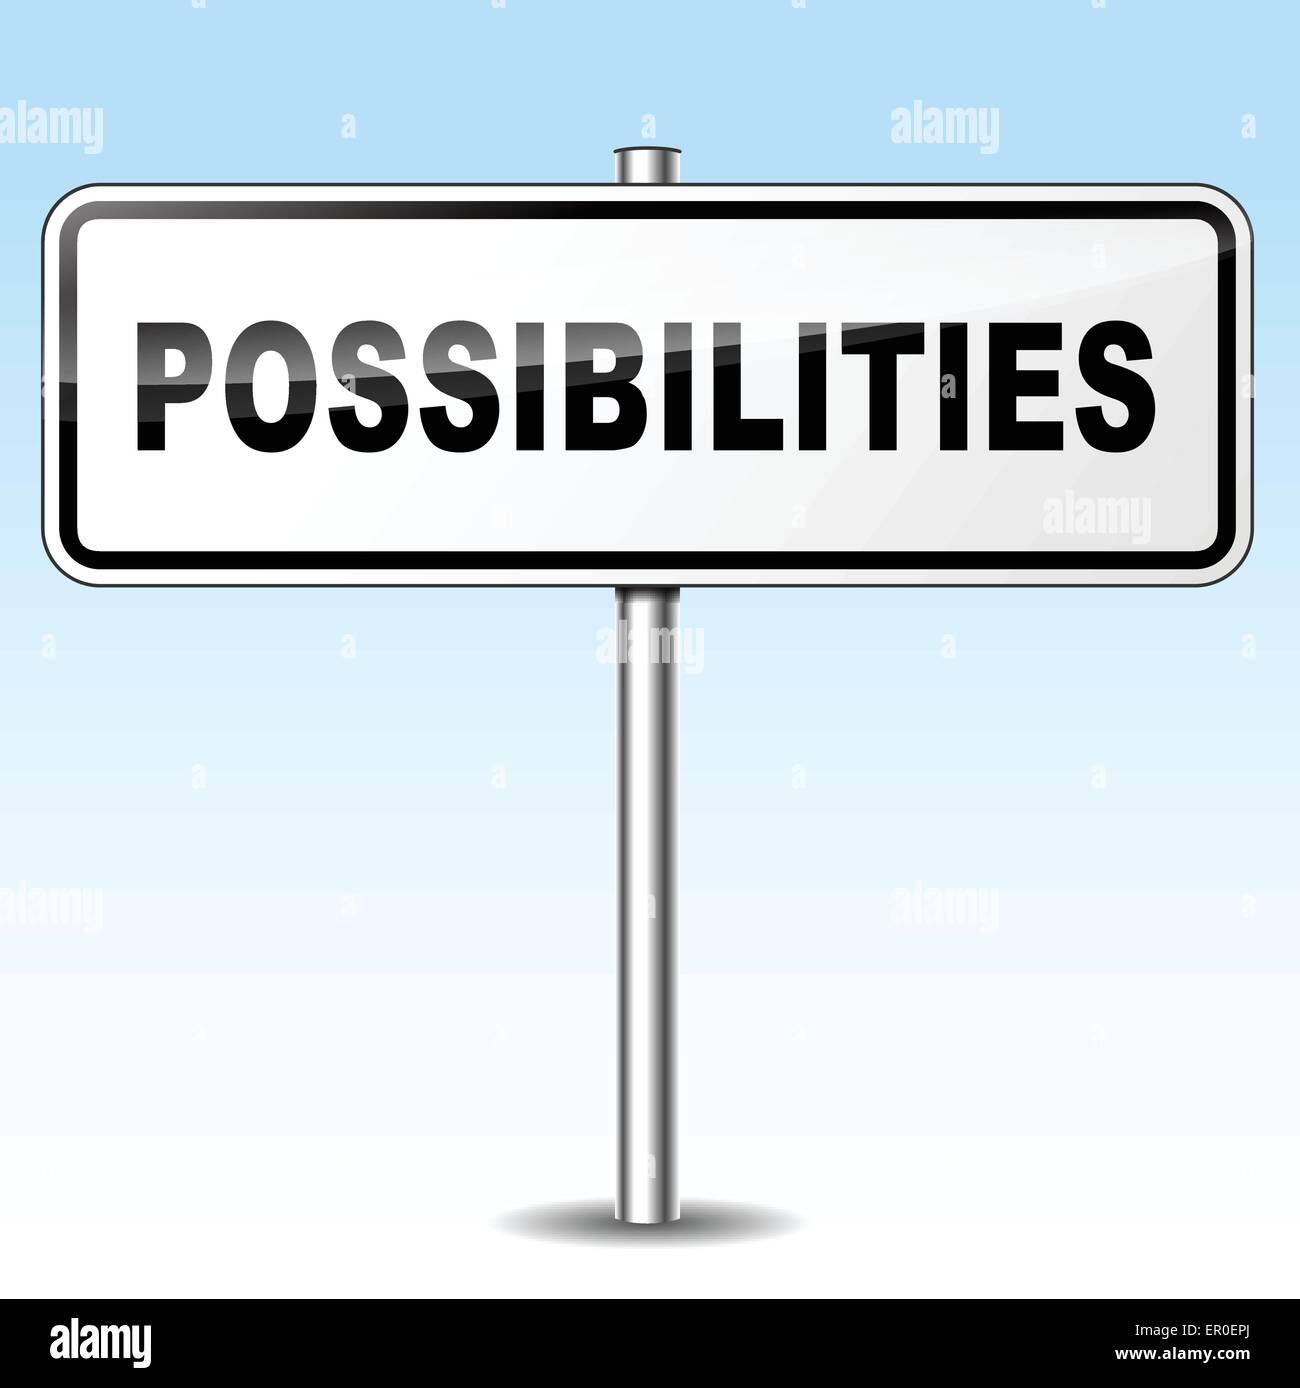 Illustration of possibilities sign on sky background Stock Vector